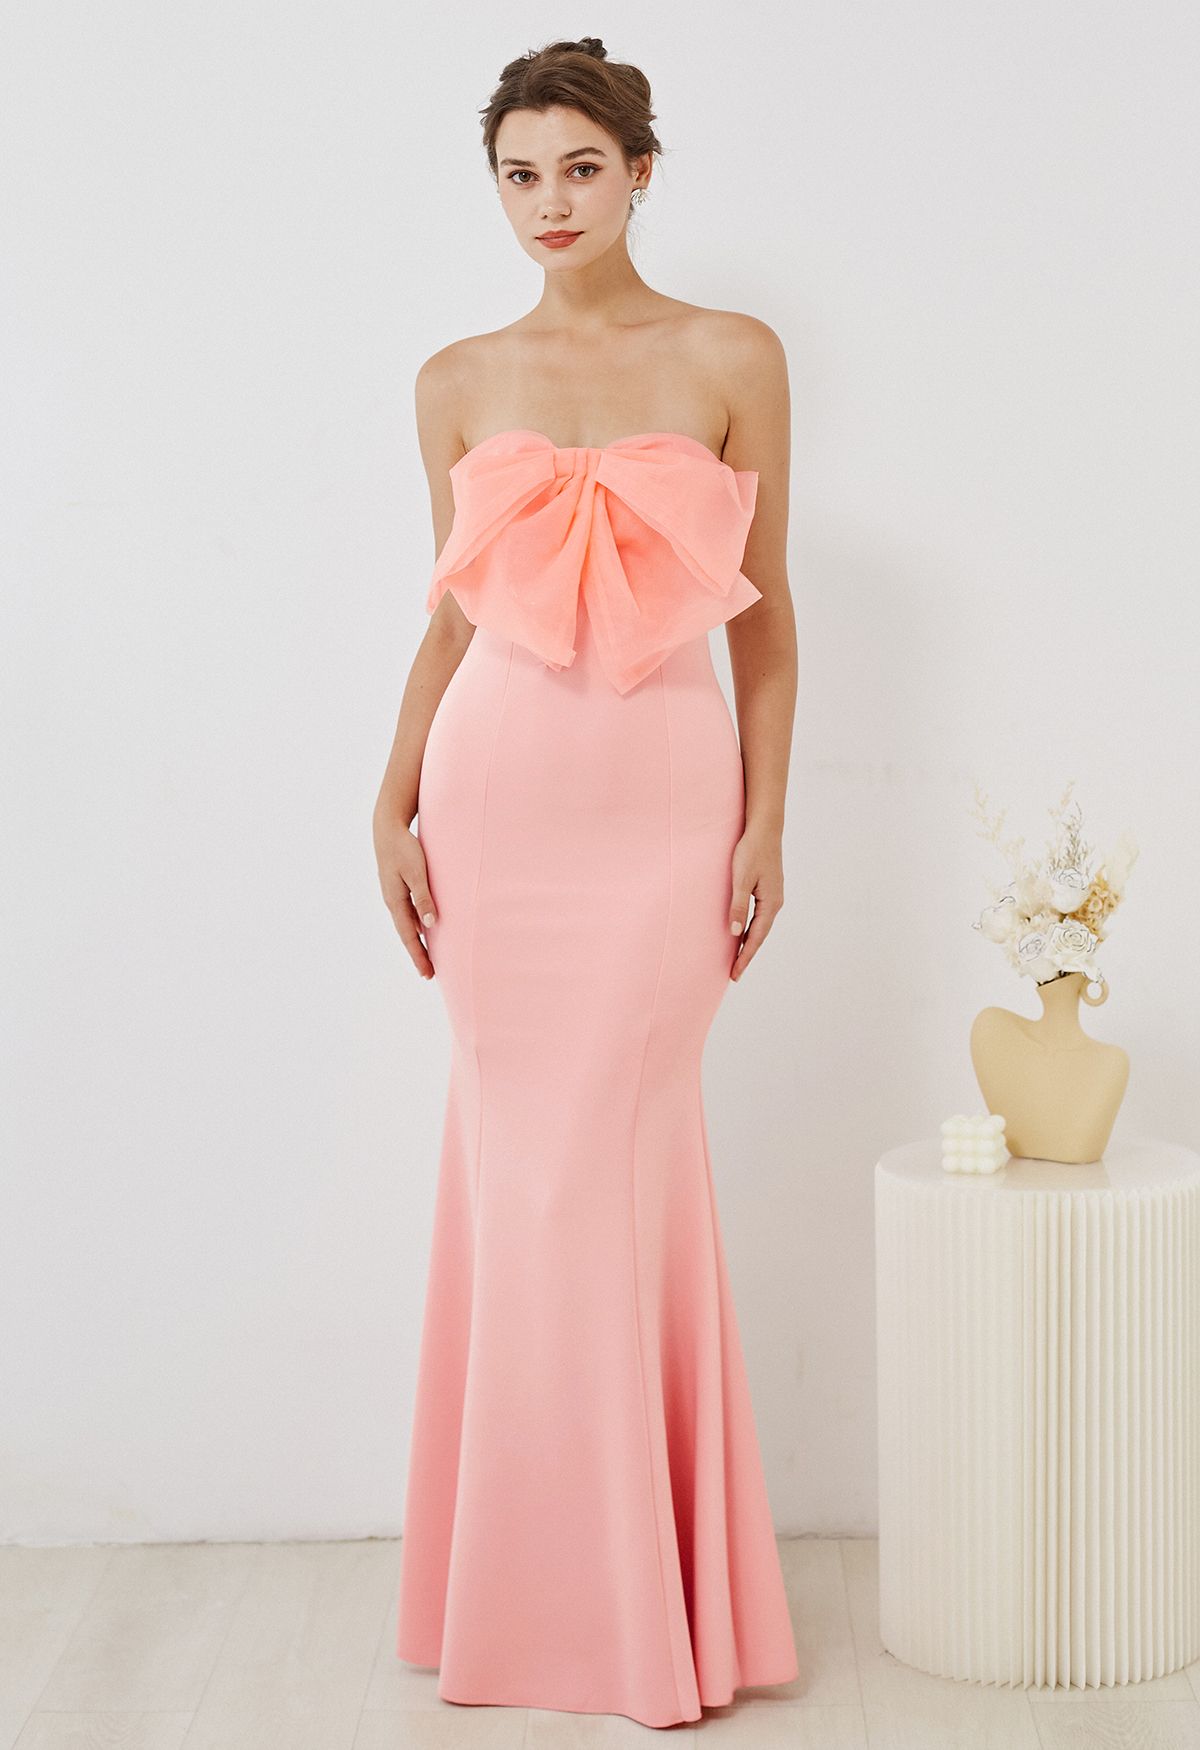 Bowknot Strapless Mermaid Gown in Pink